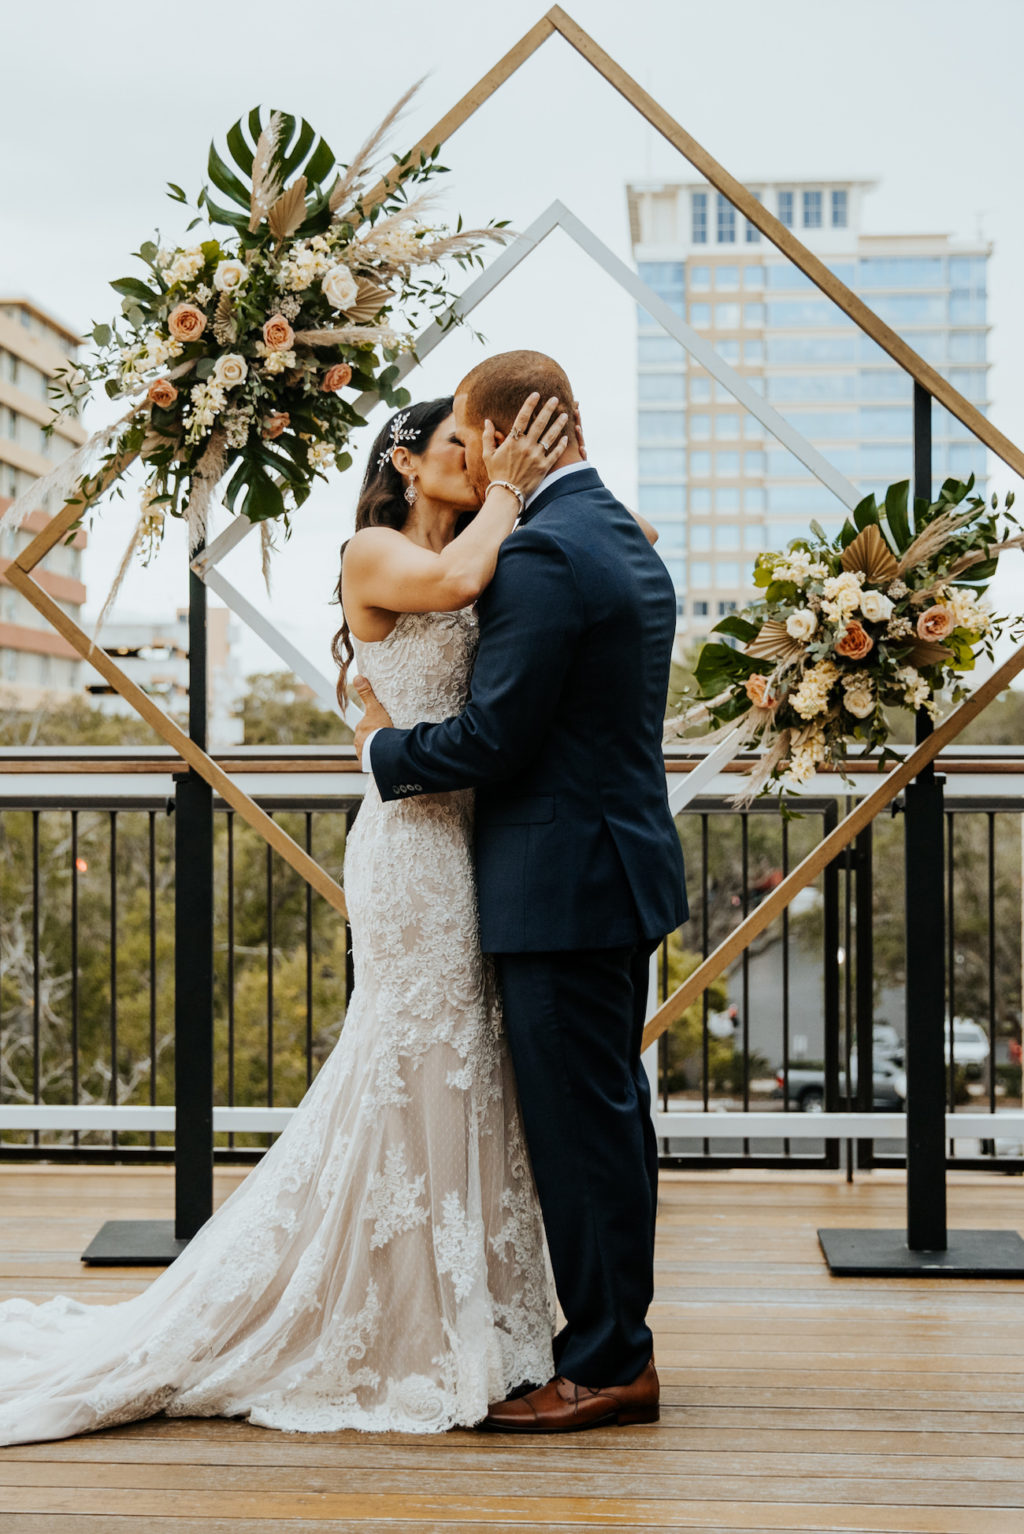 Bride and Groom First Kiss during Boho St. Pete Florida Wedding at Red Mesa Events Rooftop | Geometric Diamond Ceremony Arch Floral Spray Arrangement with White and Copper Quicksand Roses, White Stock, Pampas Grass, and Tropical eucalyptus Greenery | Bride Wearing Illusion Lace V Neck Sheath Wedding Dress Bridal Gown | Groom Wearing Classic Navy Blue Suit Tux